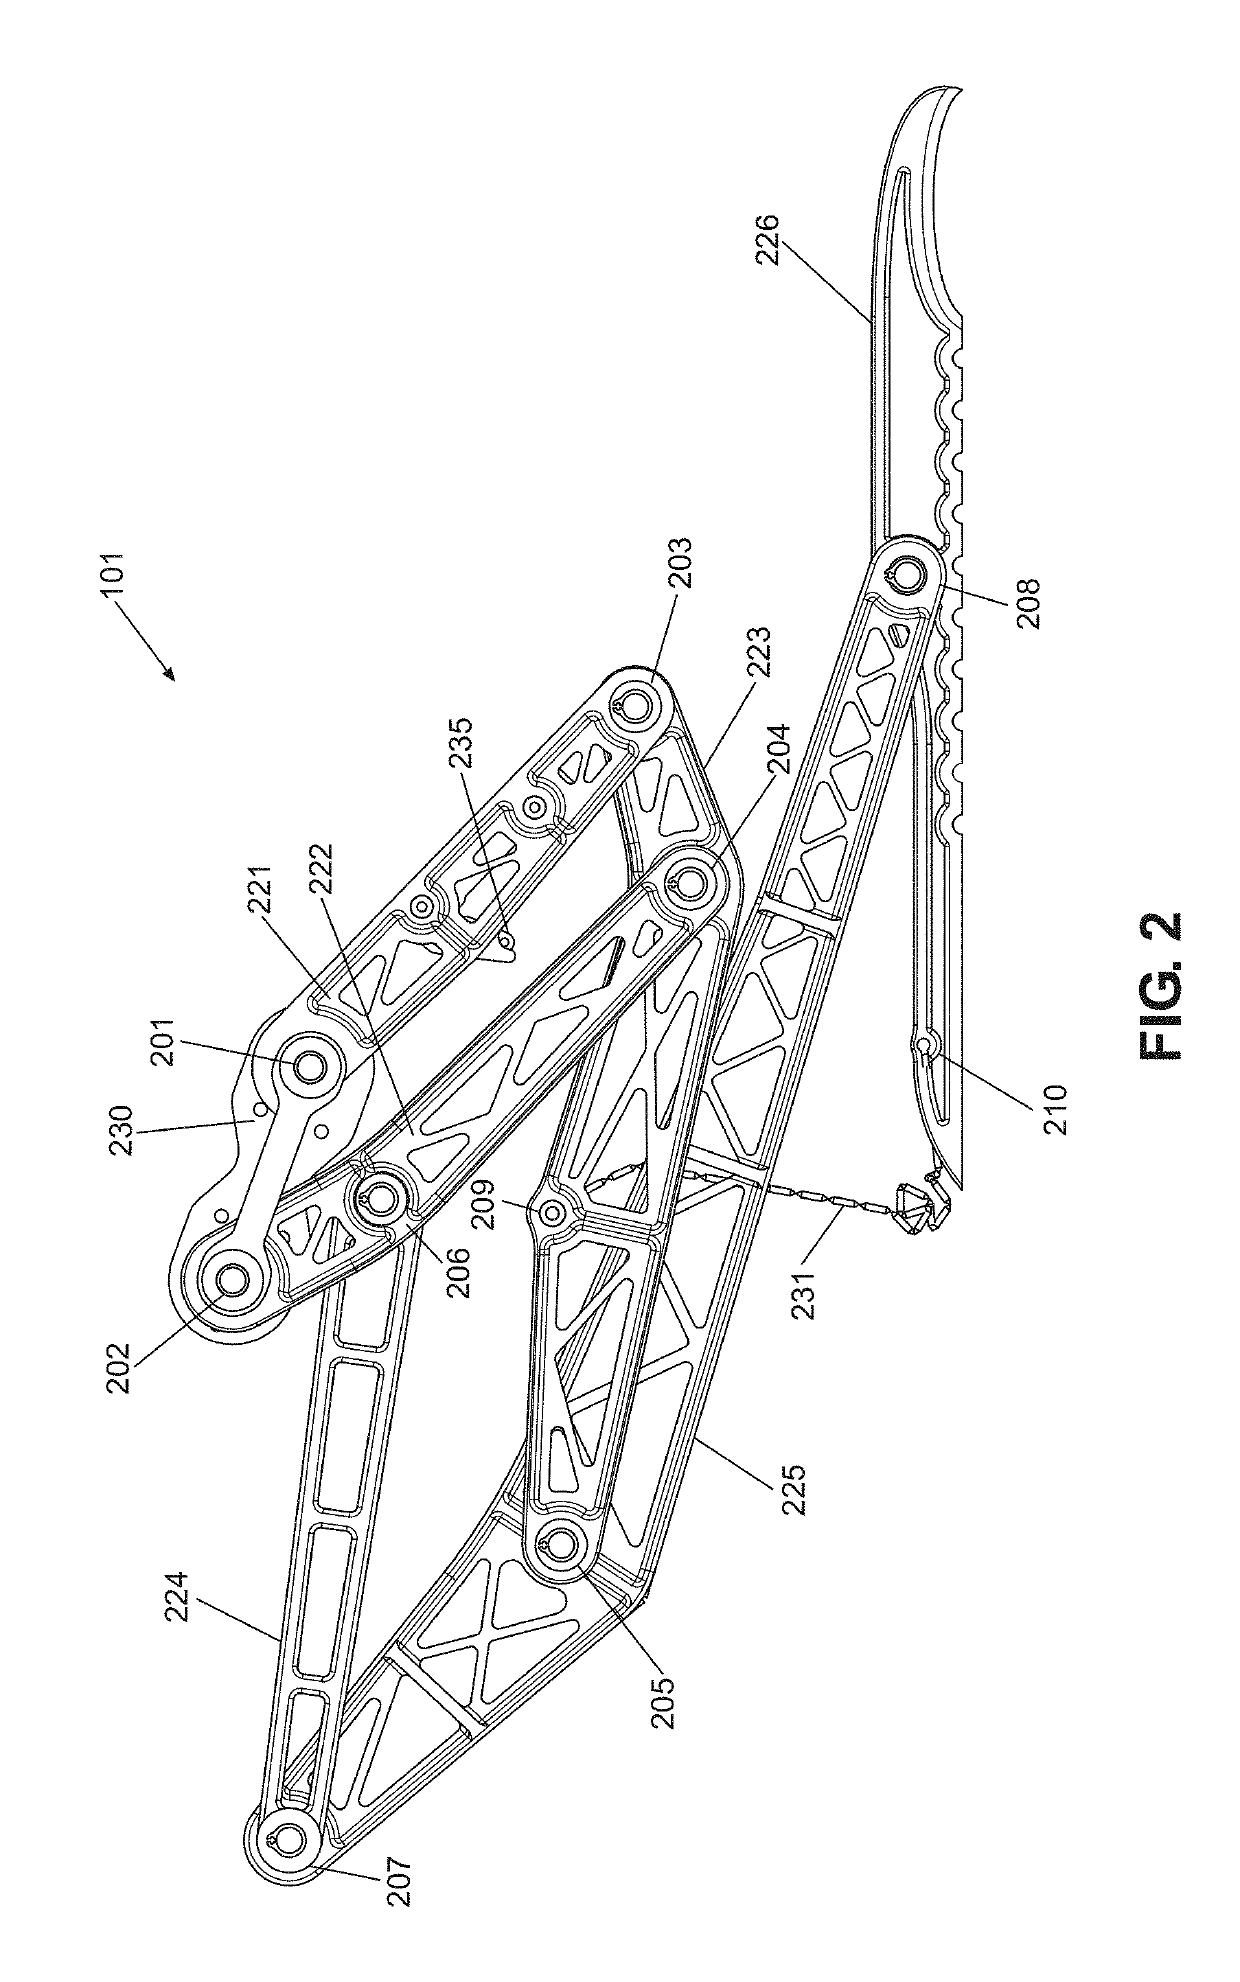 Leg undercarriage system for jumping aircraft